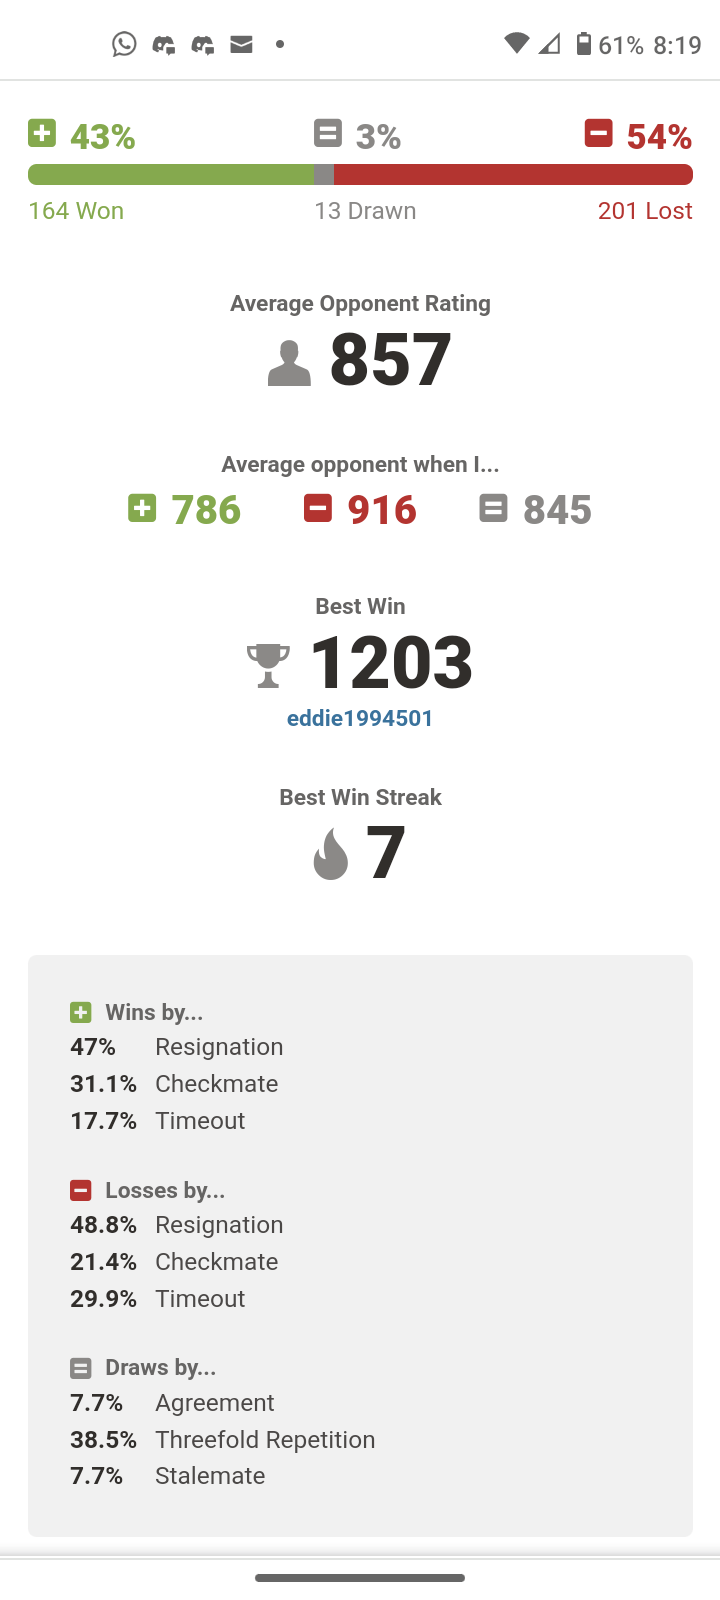 How good is a Blitz rating of 800 plus in chess.com for a 5-minute